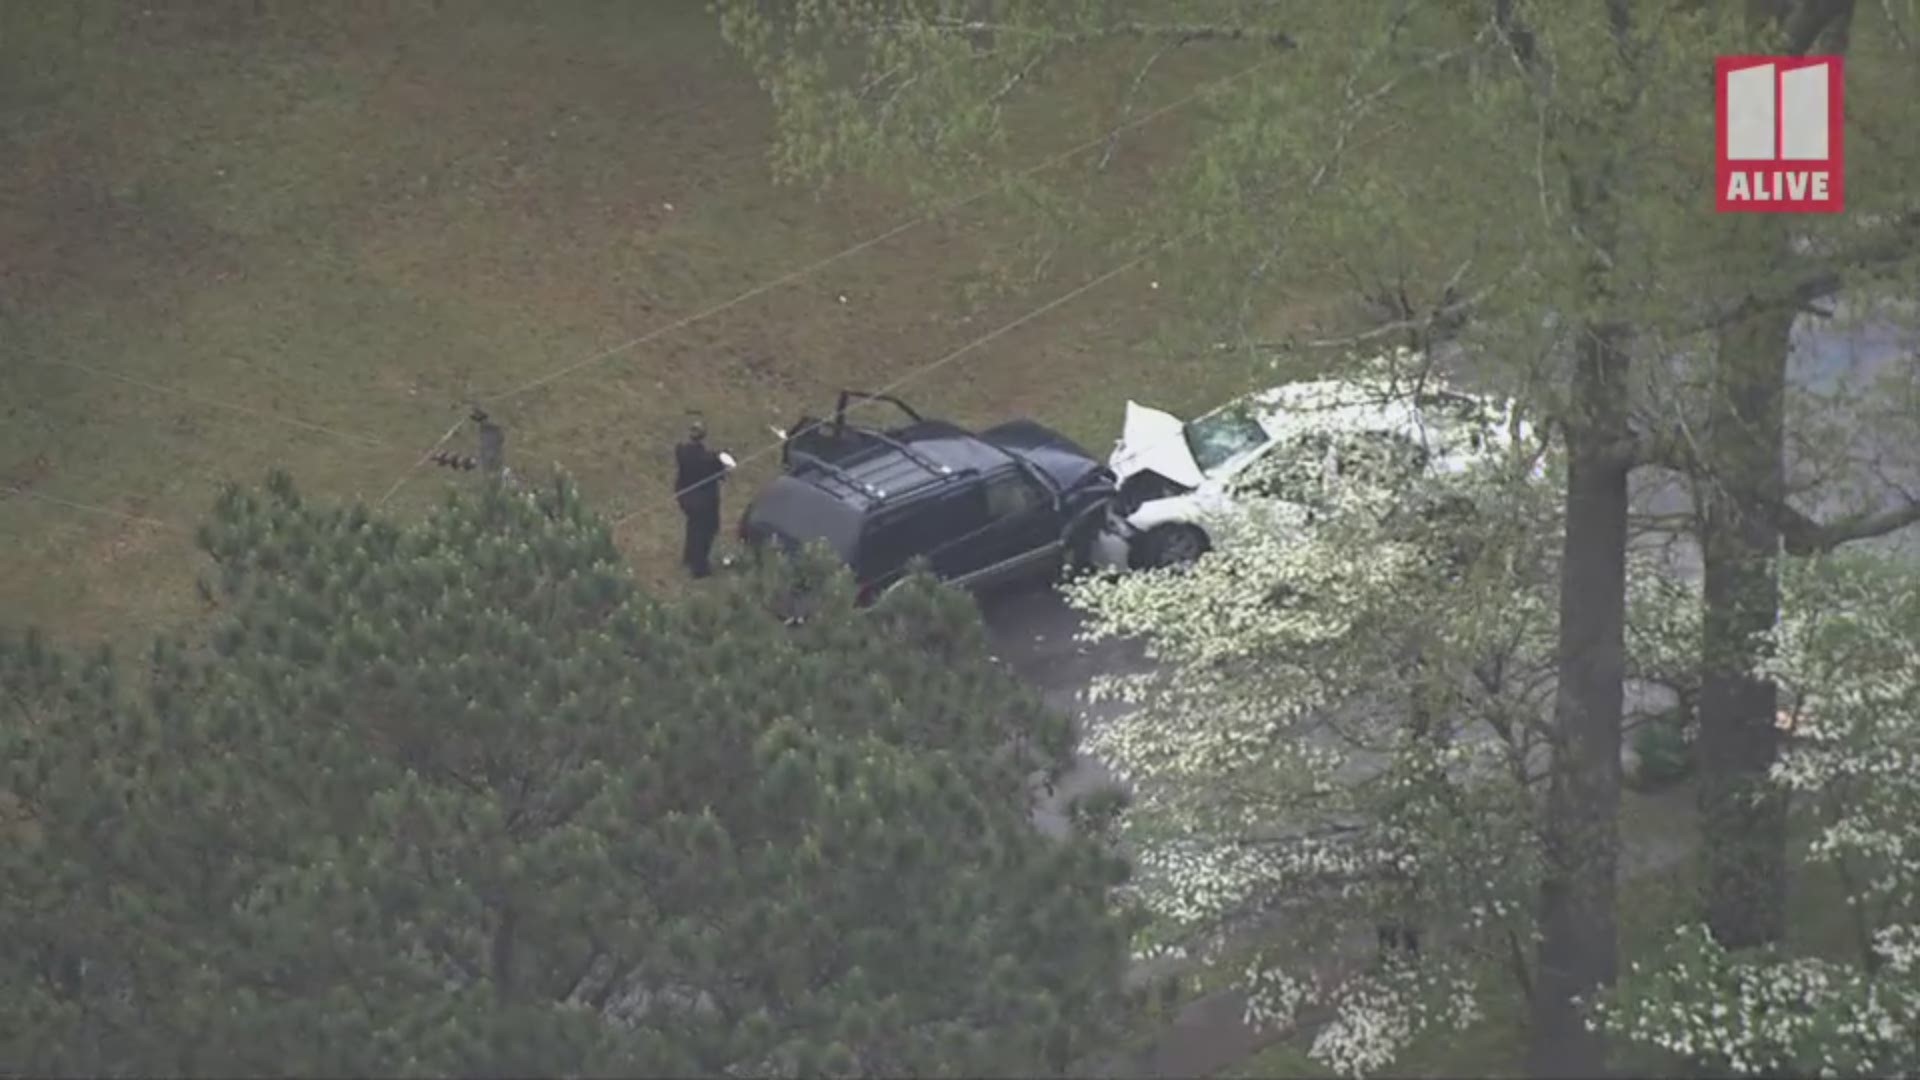 11Alive SkyTracker video shows what appears to be a head-on collision in a residential area of Stockbridge.